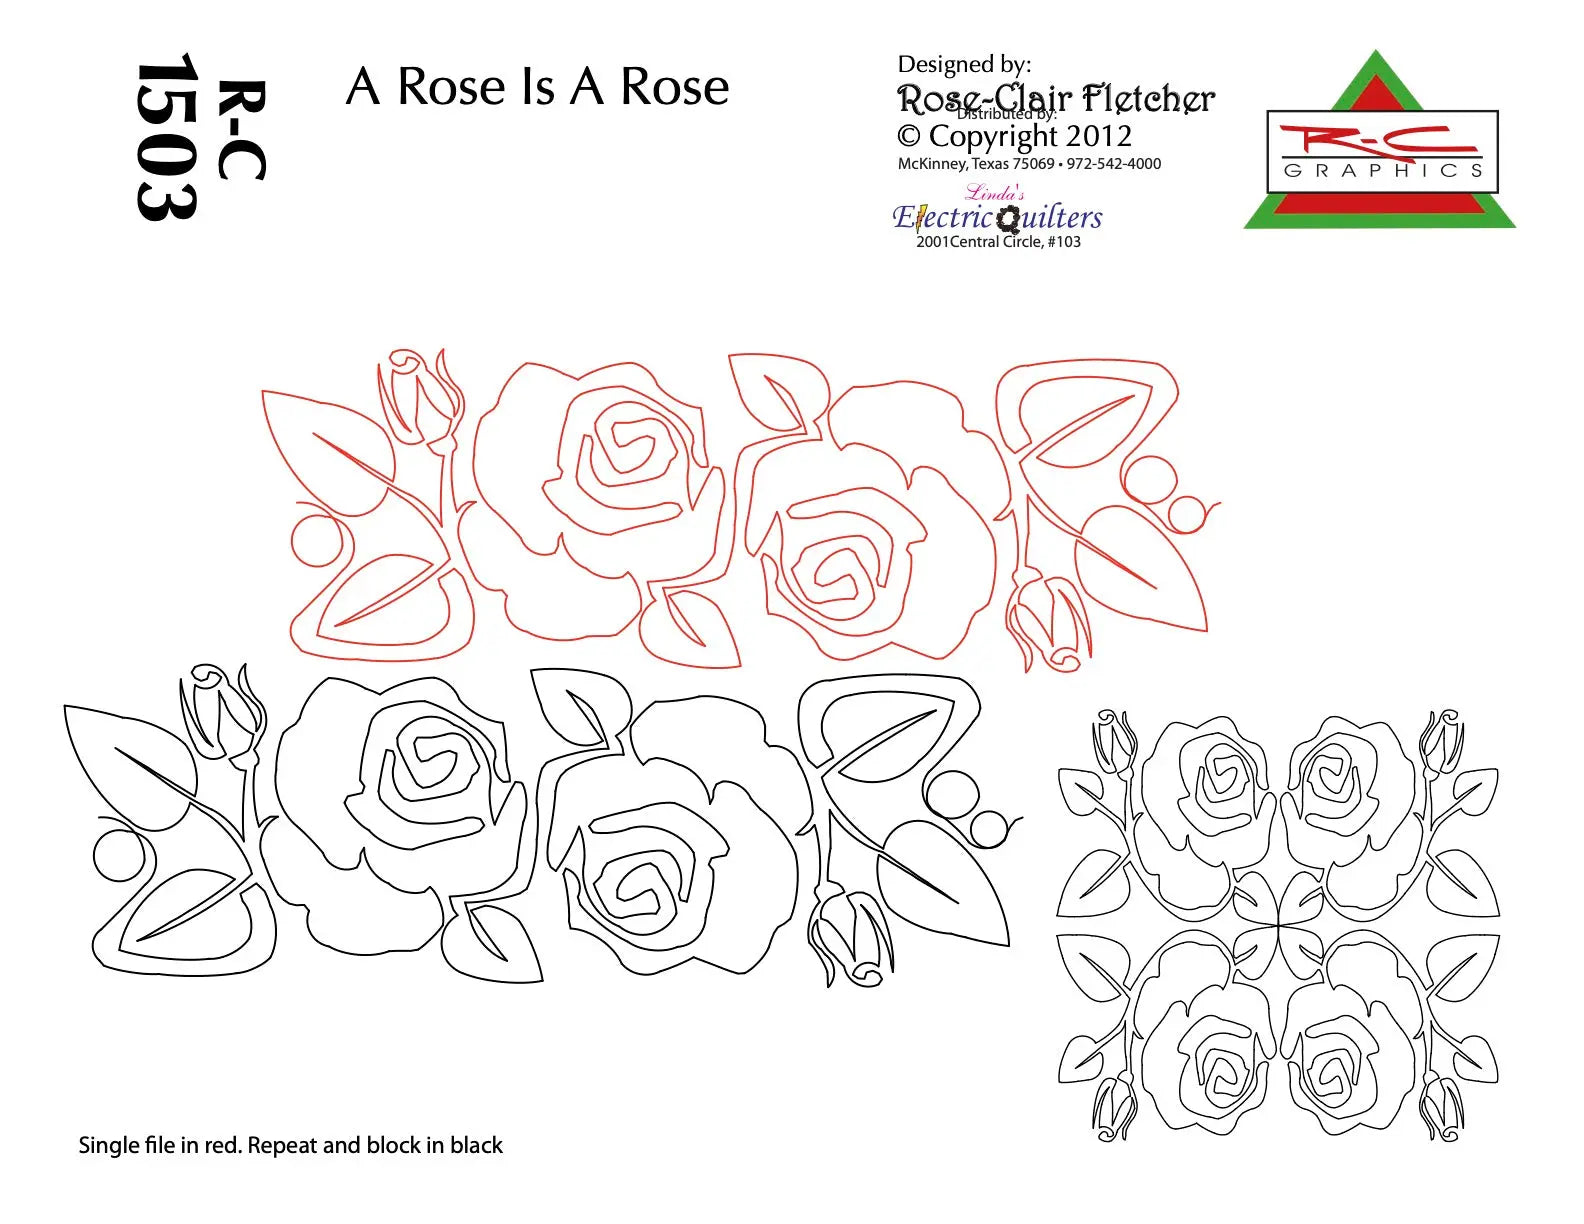 1503 A Rose Is A Rose Pantograph And Block by Rose-Clair Fletcher - Linda's Electric Quilters